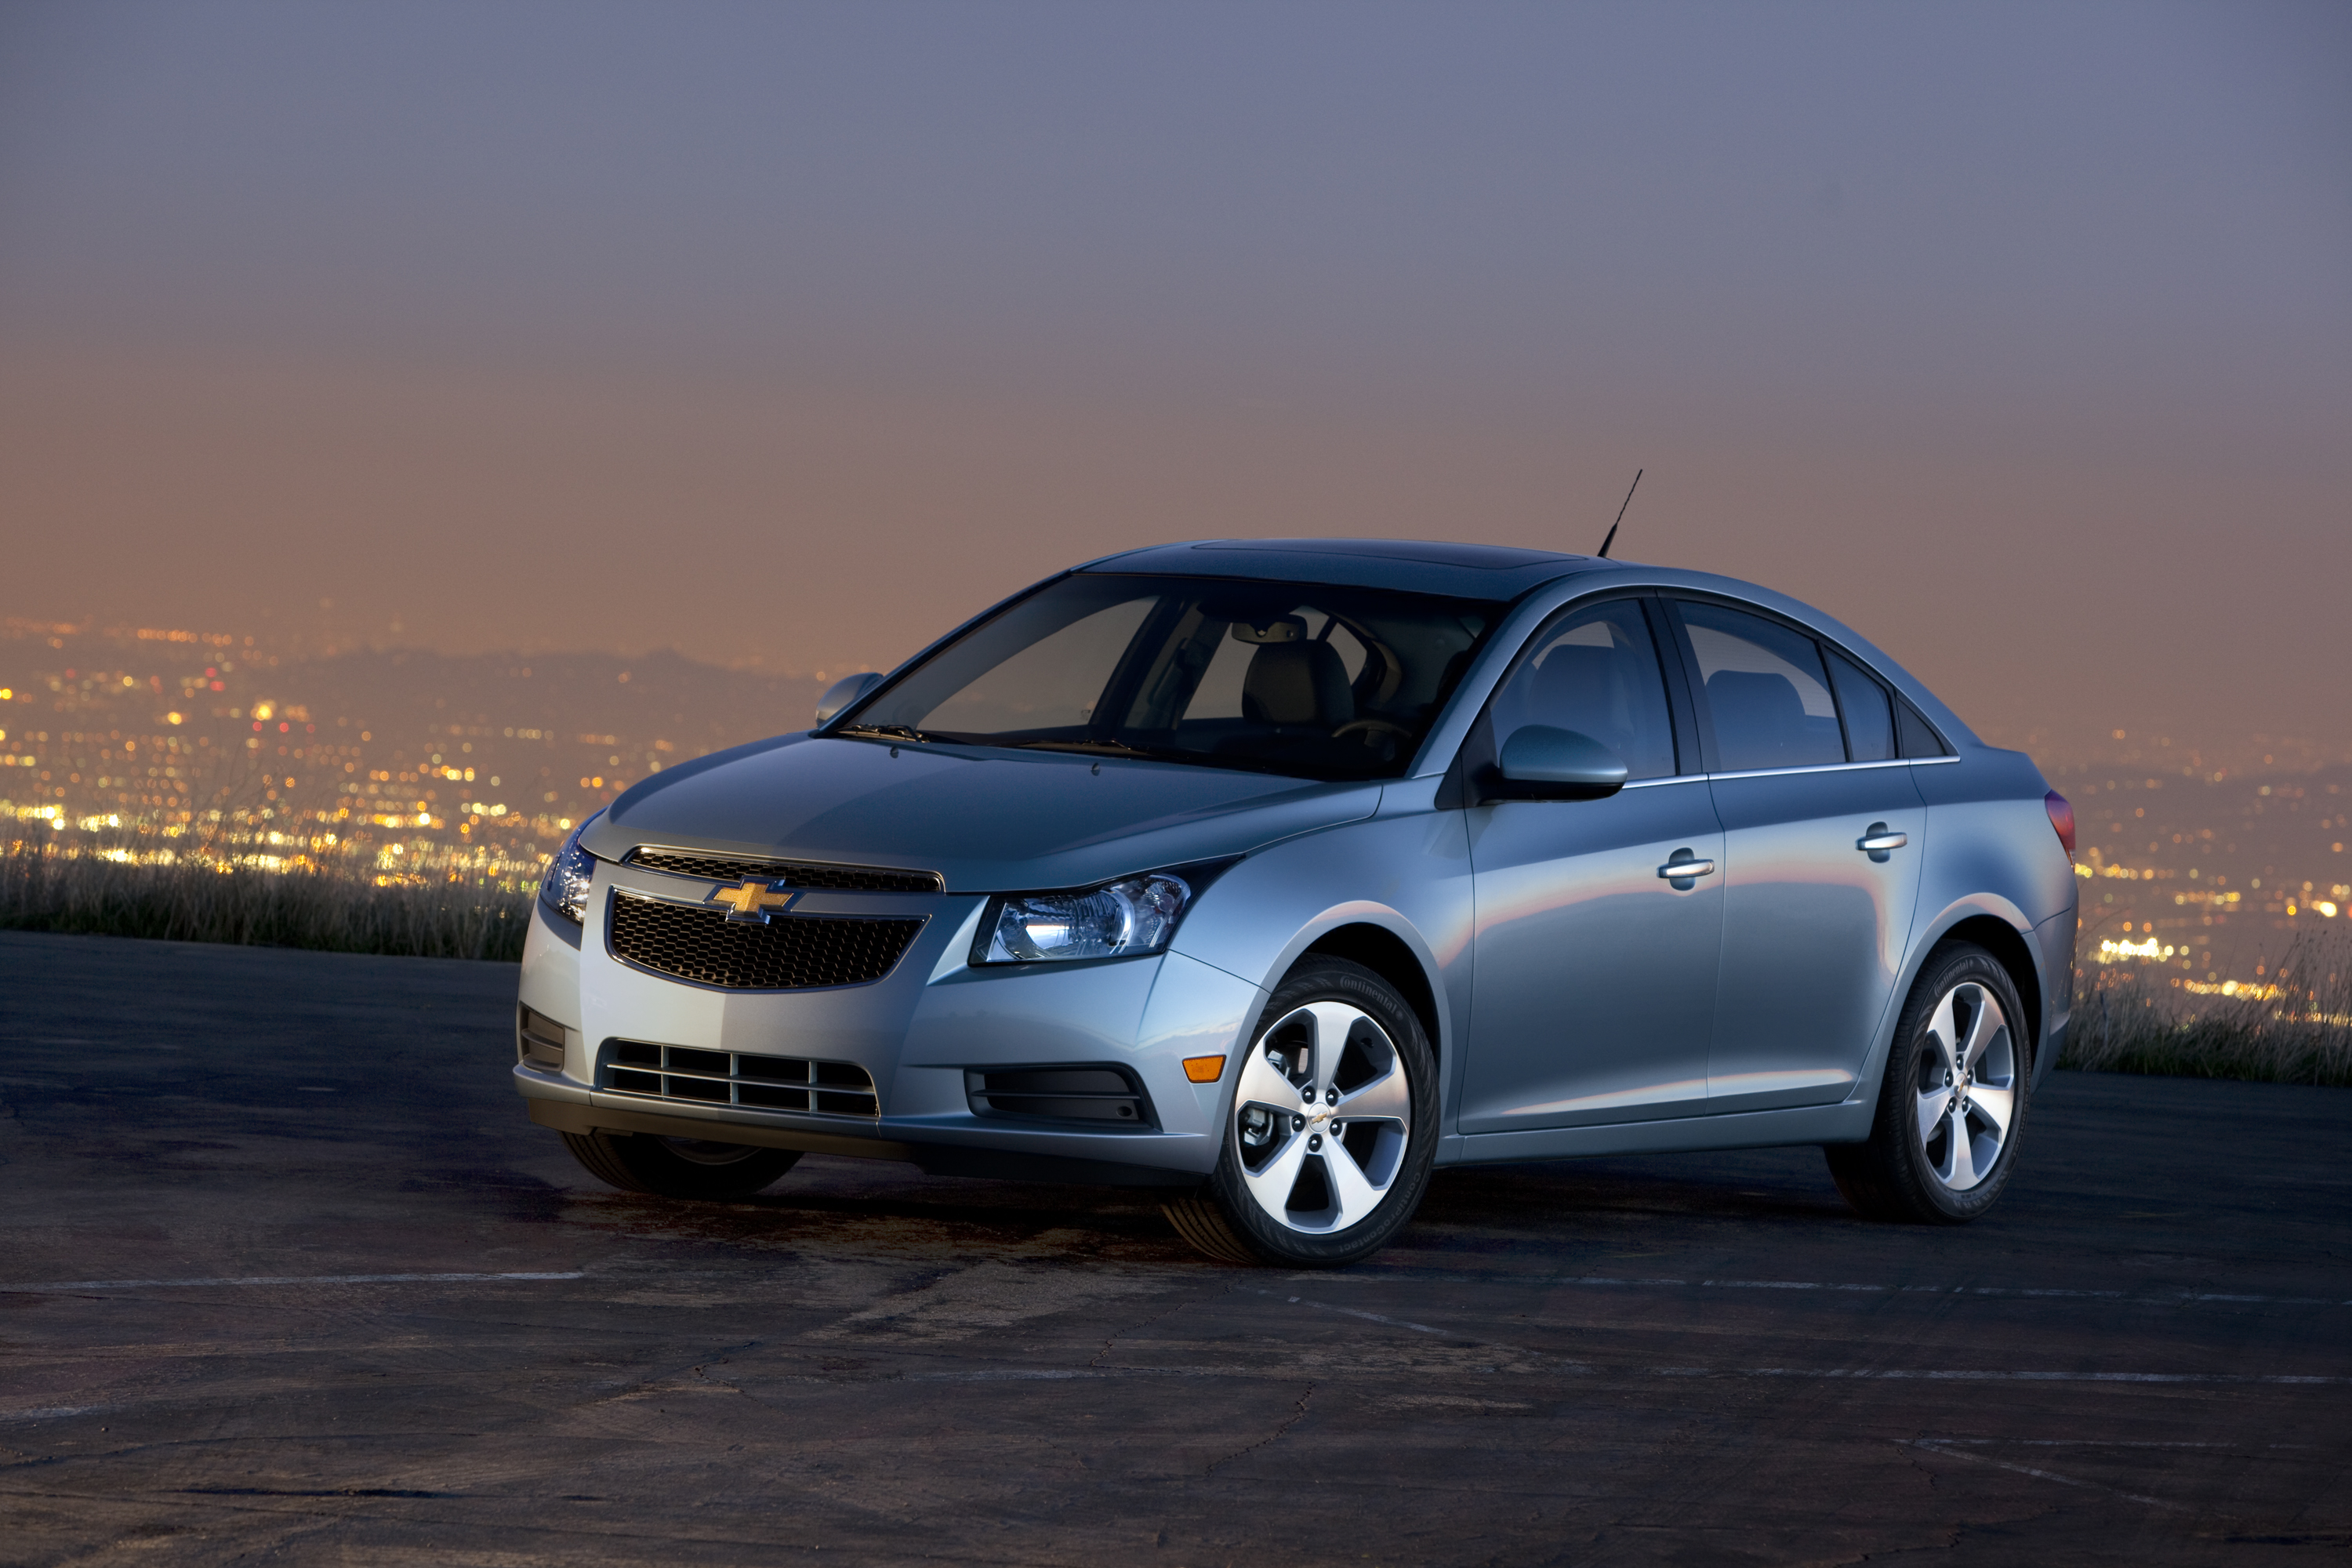 2011 Chevrolet Cruze (Chevy) Review, Ratings, Specs, Prices, and Photos -  The Car Connection